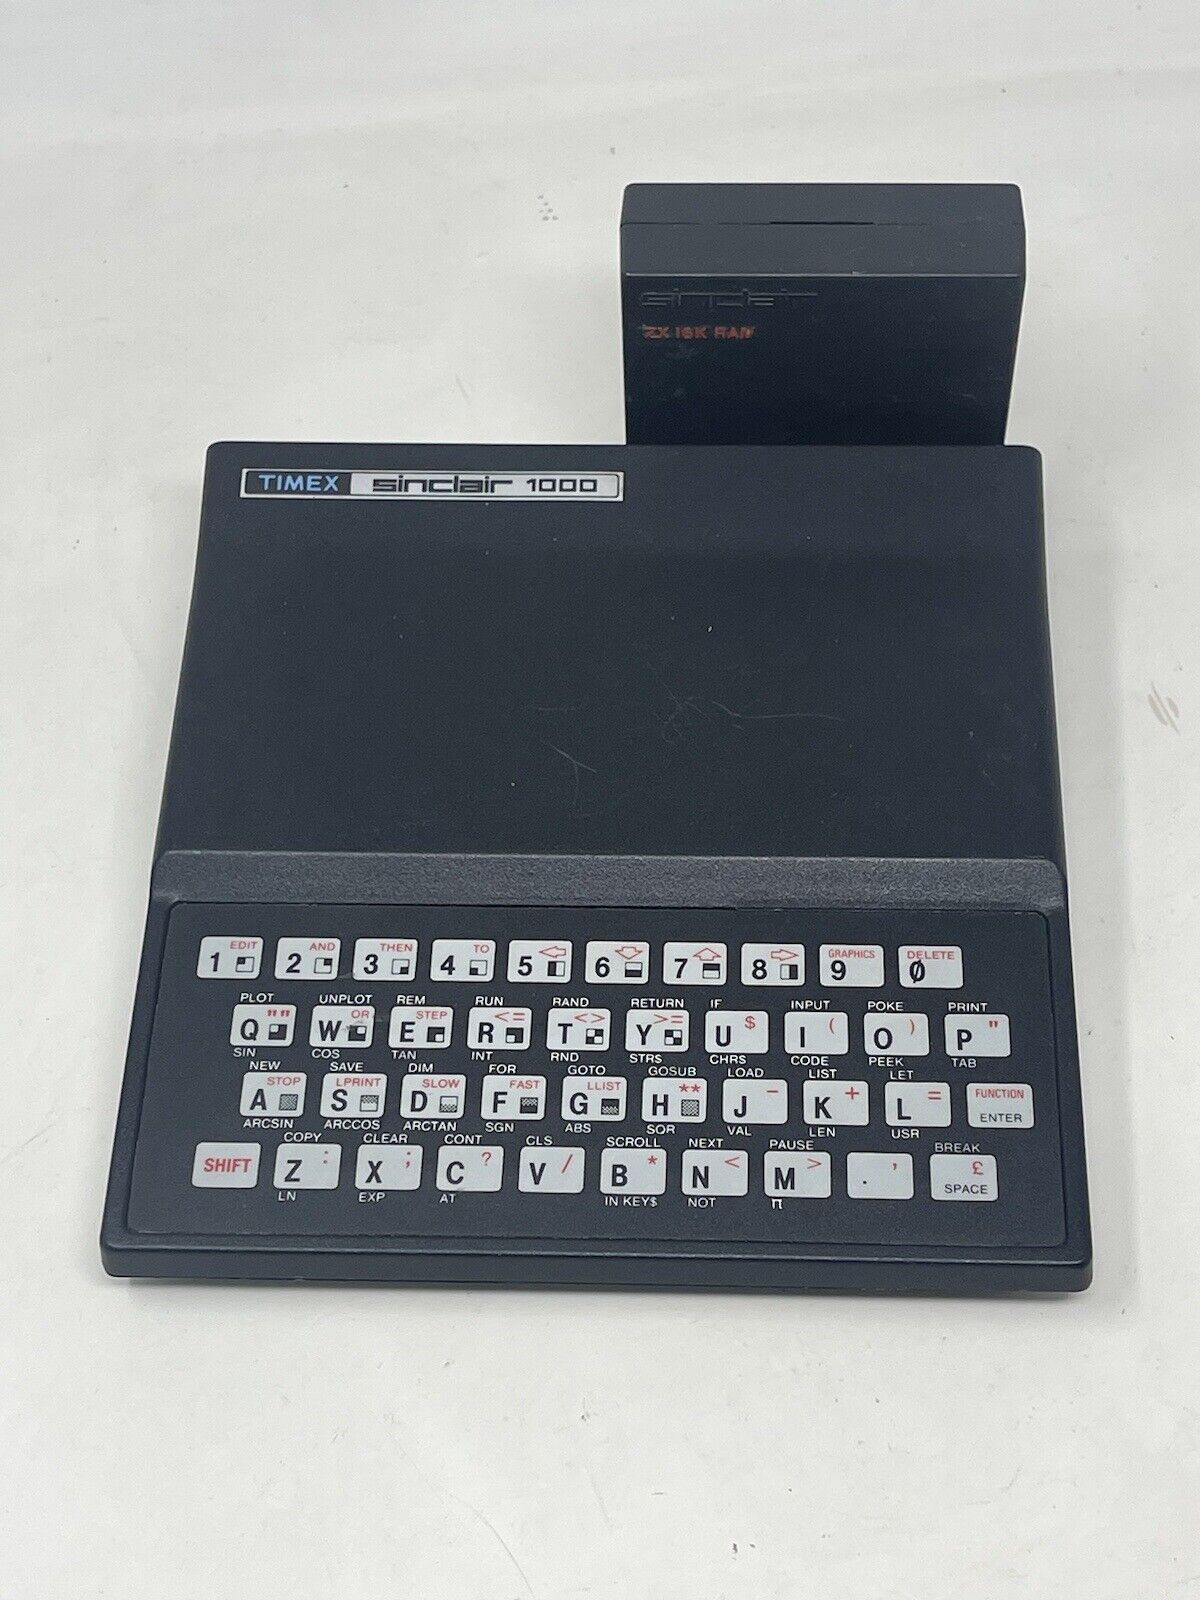 Vintage Timex Sinclair 1000 Computer Sold As Is Parts or Repair Untested